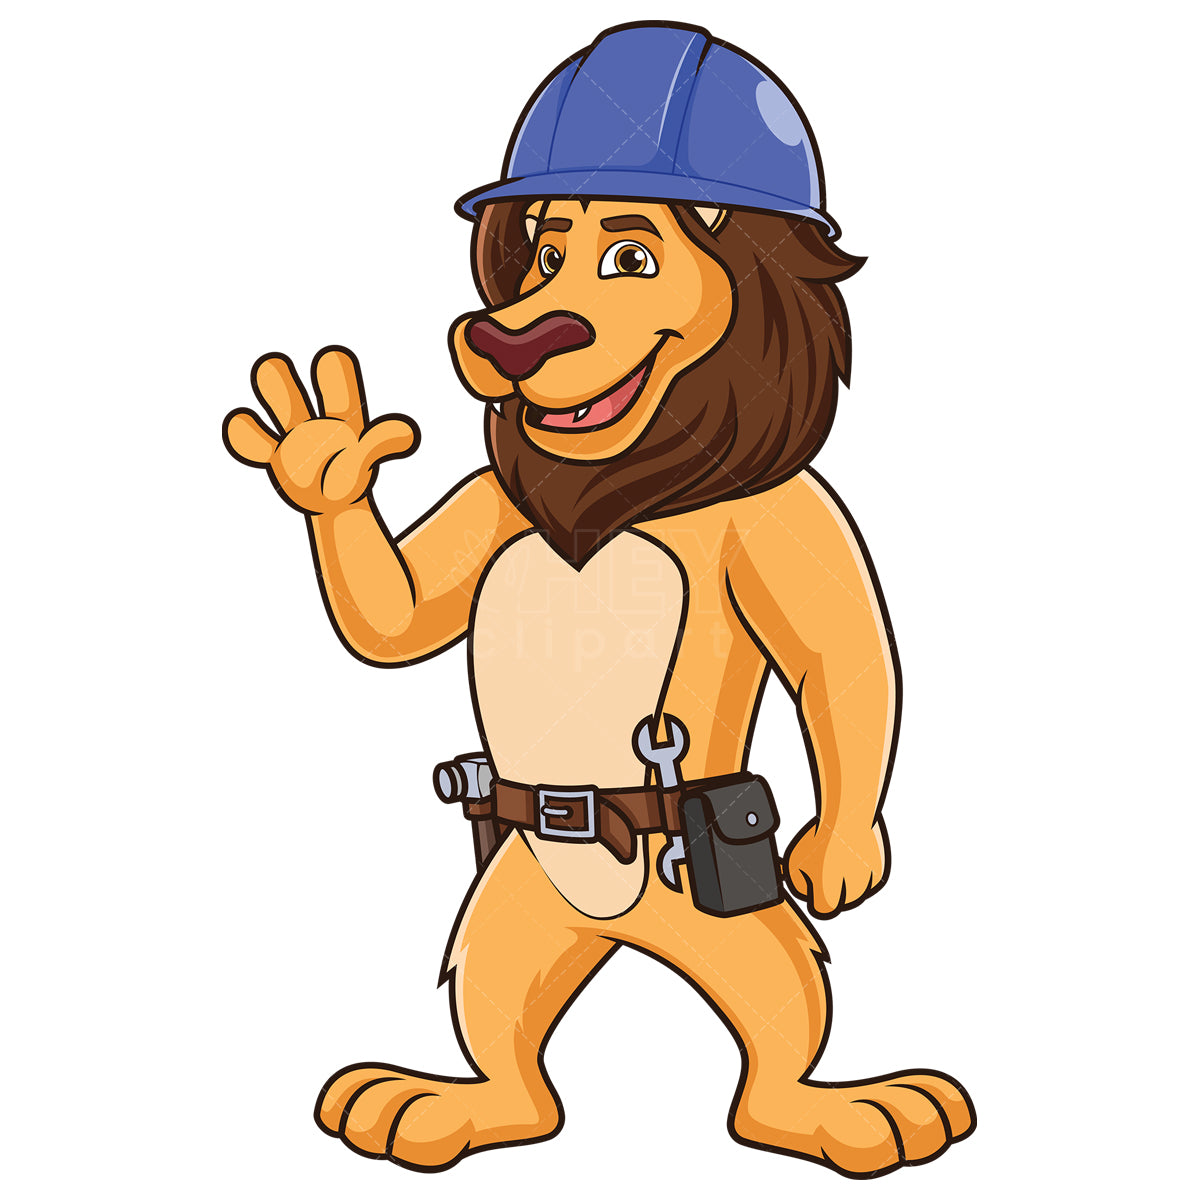 Royalty-free stock vector illustration of a lion construction worker.